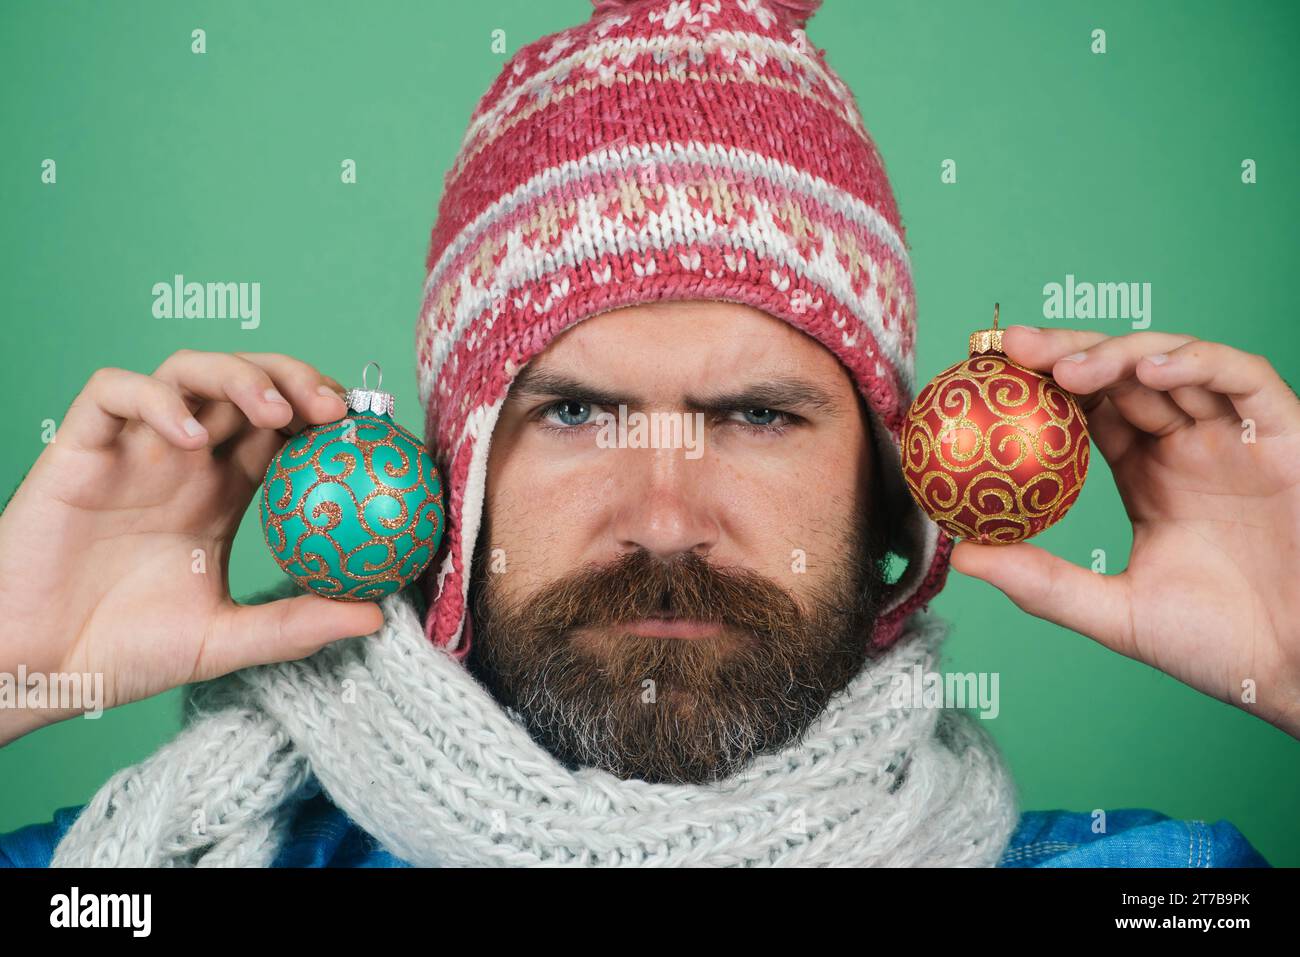 Bearded man in hat and scarf with colored Christmas tree toy. Holiday decorations and ornaments. Christmas or New Year holidays. Serious man with Stock Photo